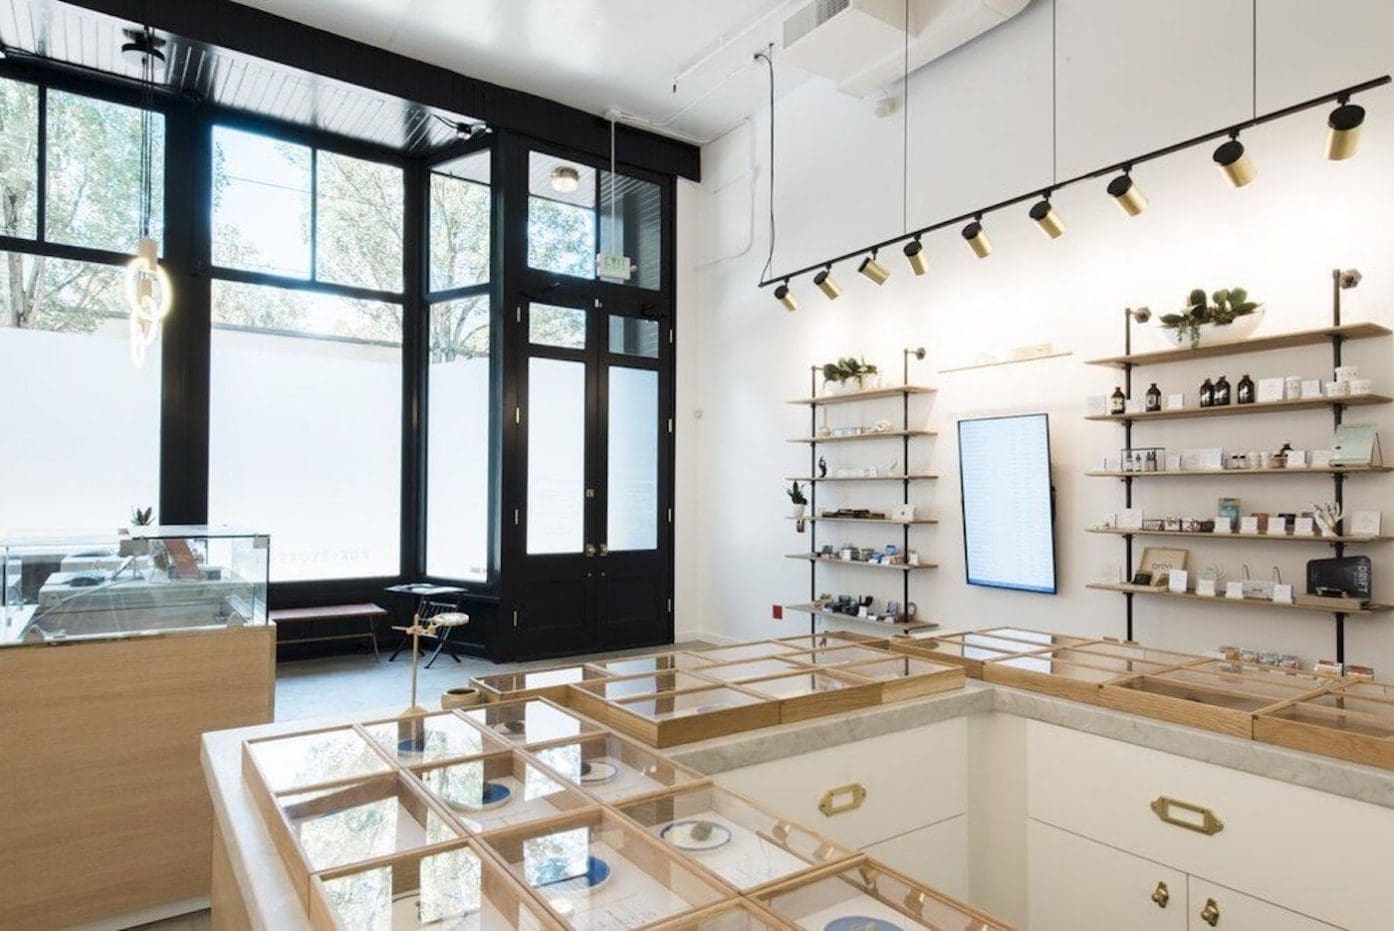 Here's how to best leverage your dispensary to enhance your cannabis and wellness routine